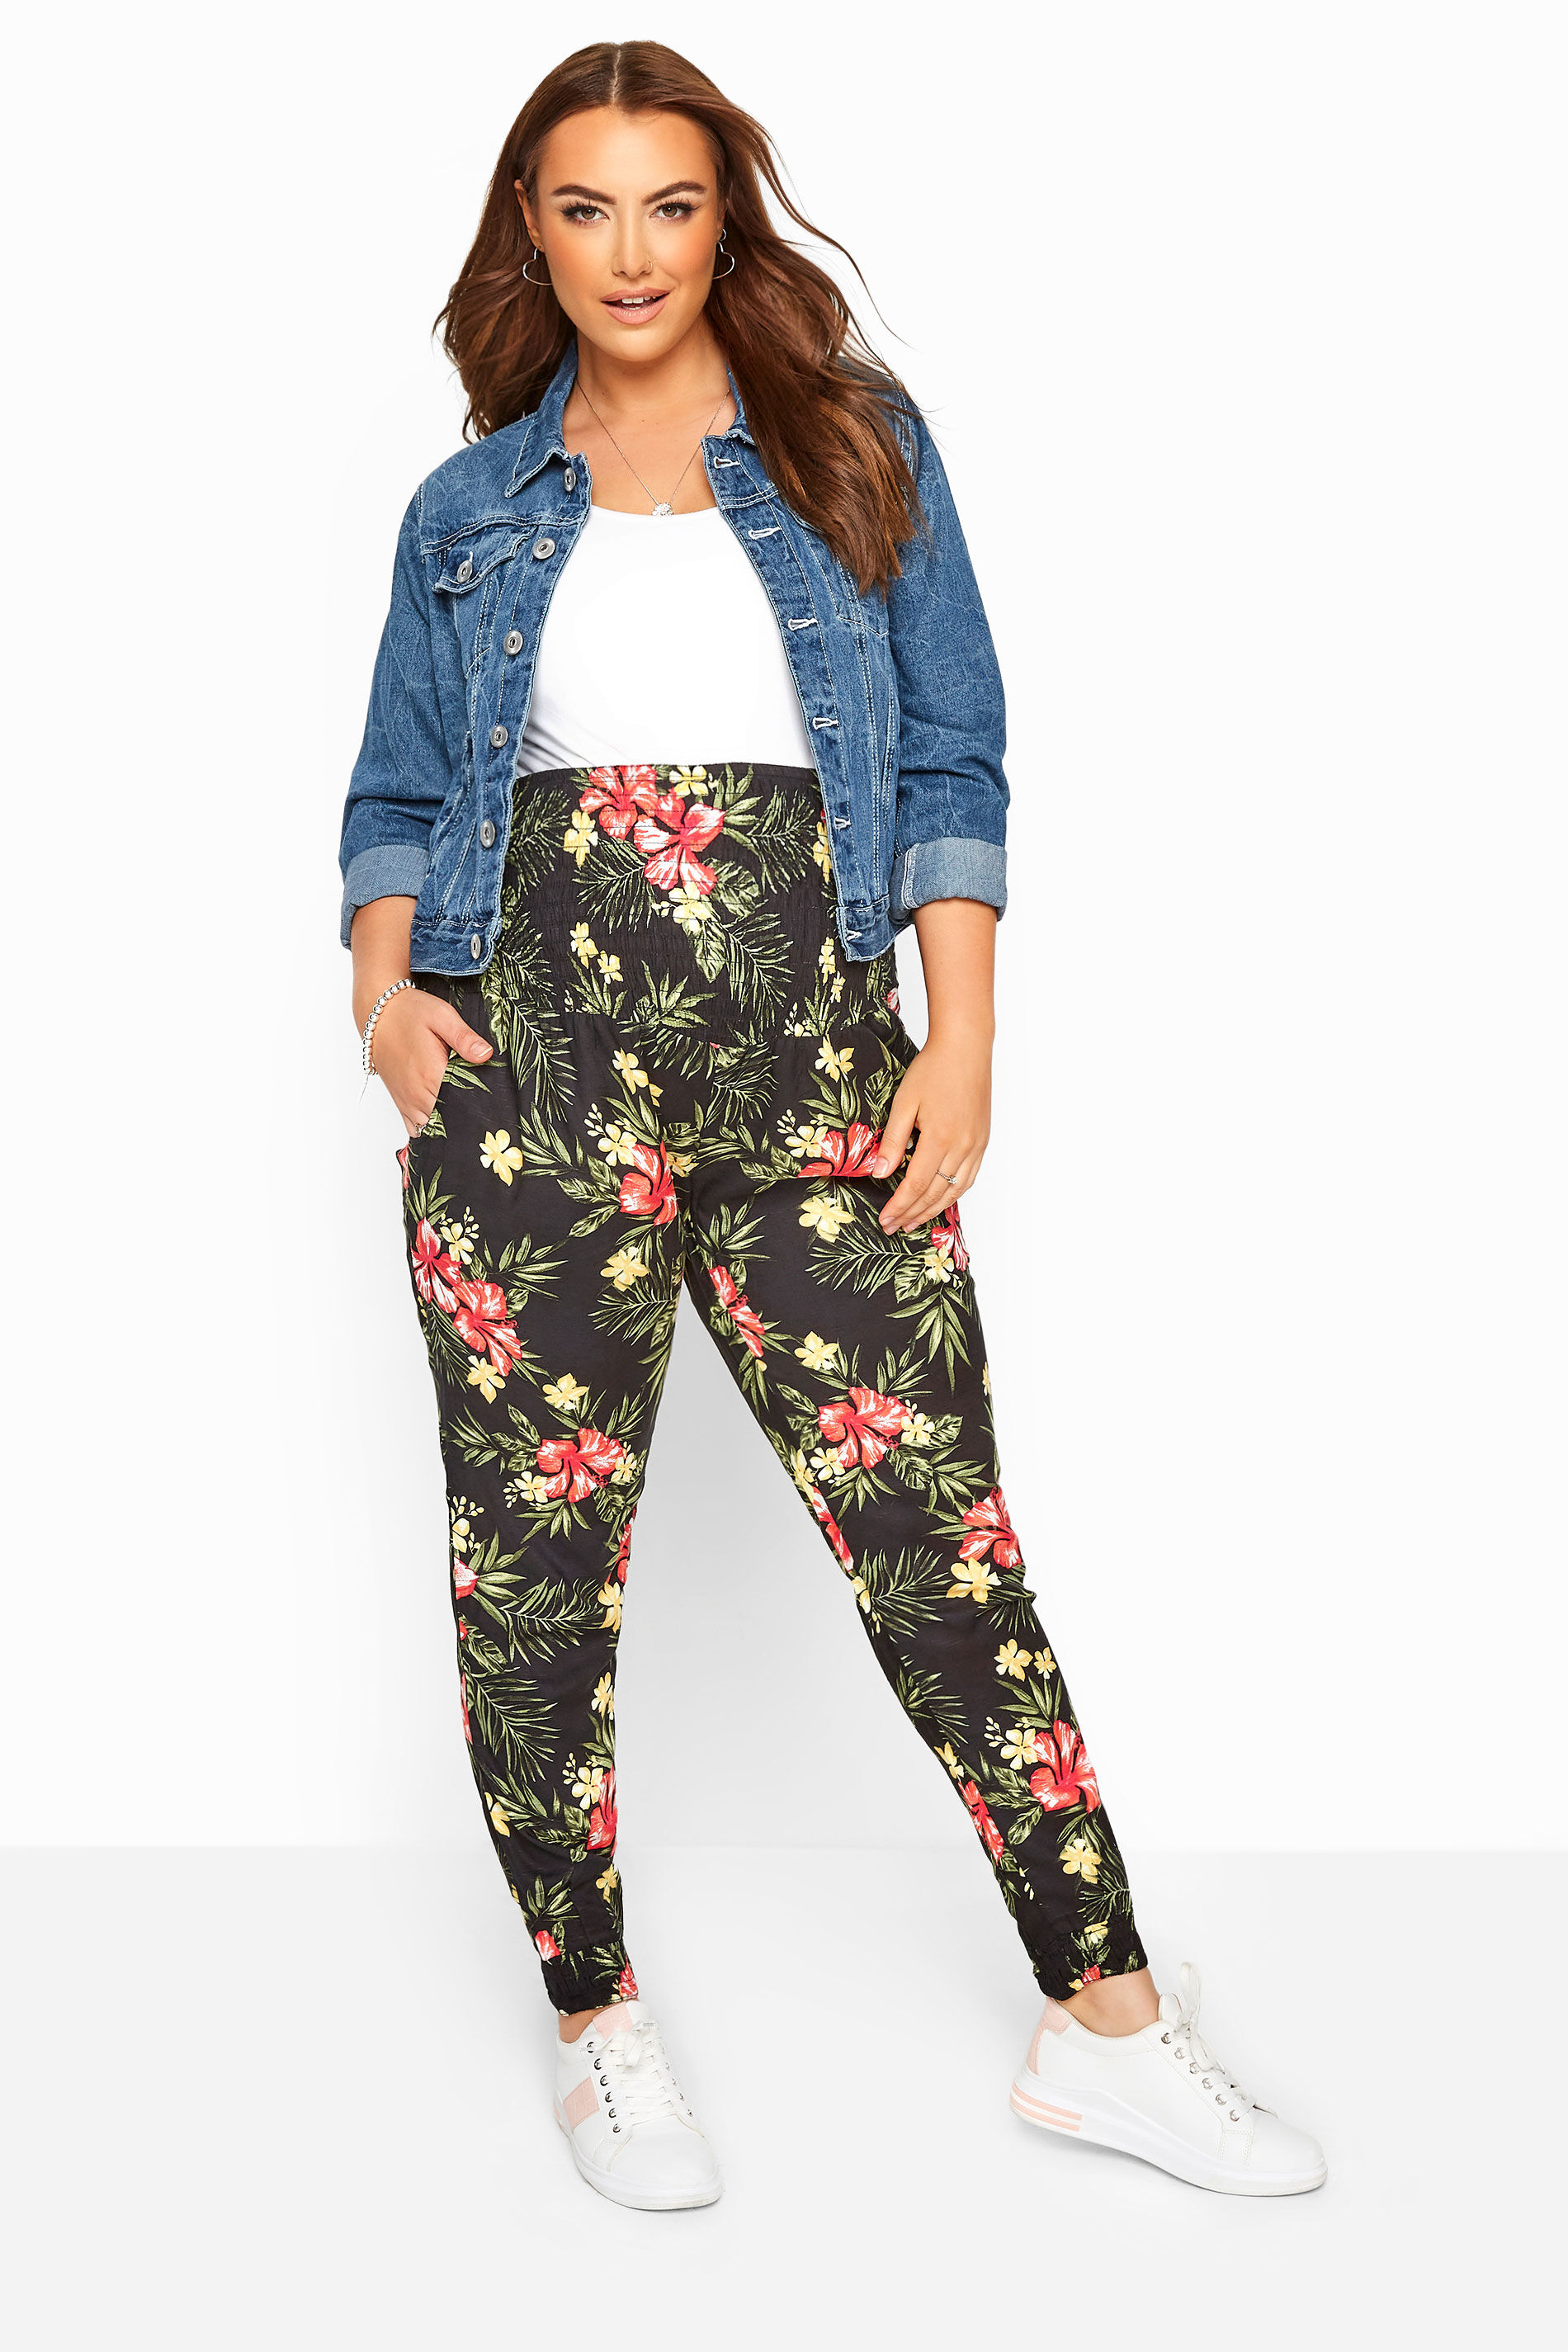 Yours Clothing Bump it up maternity black tropical floral harem trousers